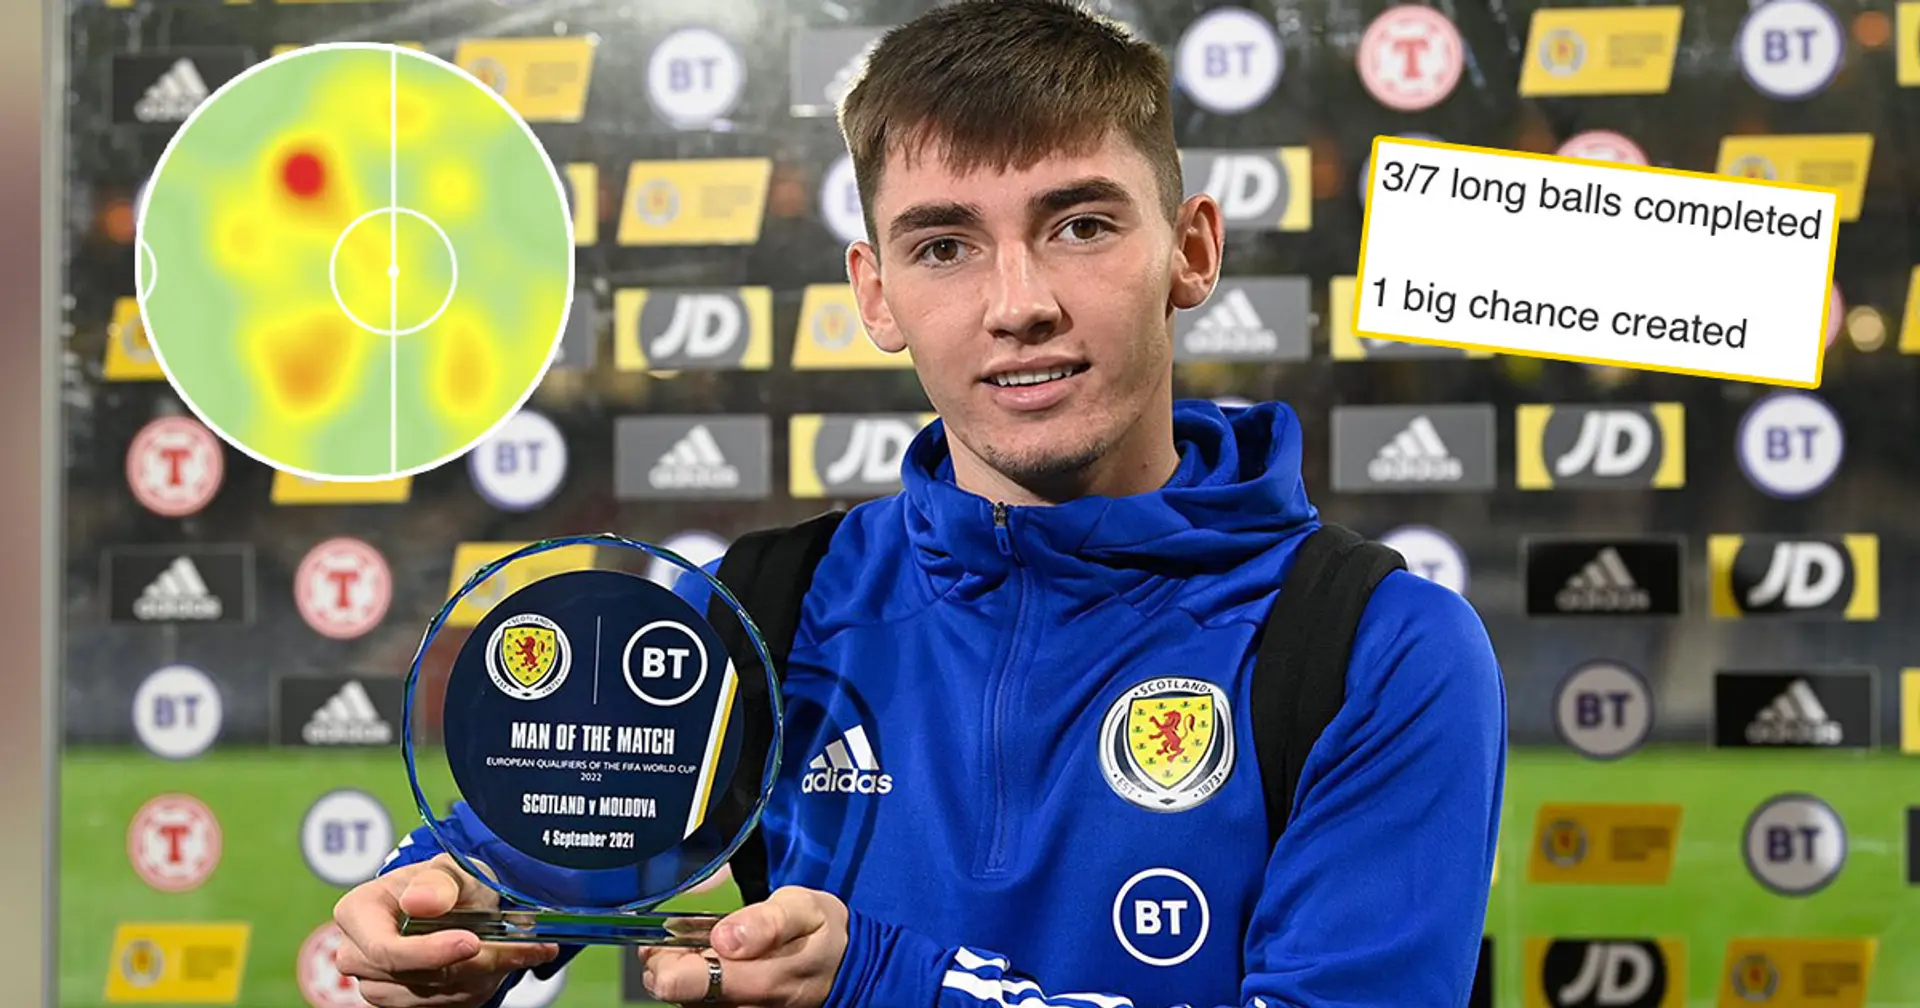 Gilmour claims yet another MOTM award as Scotland win: 8-stat review